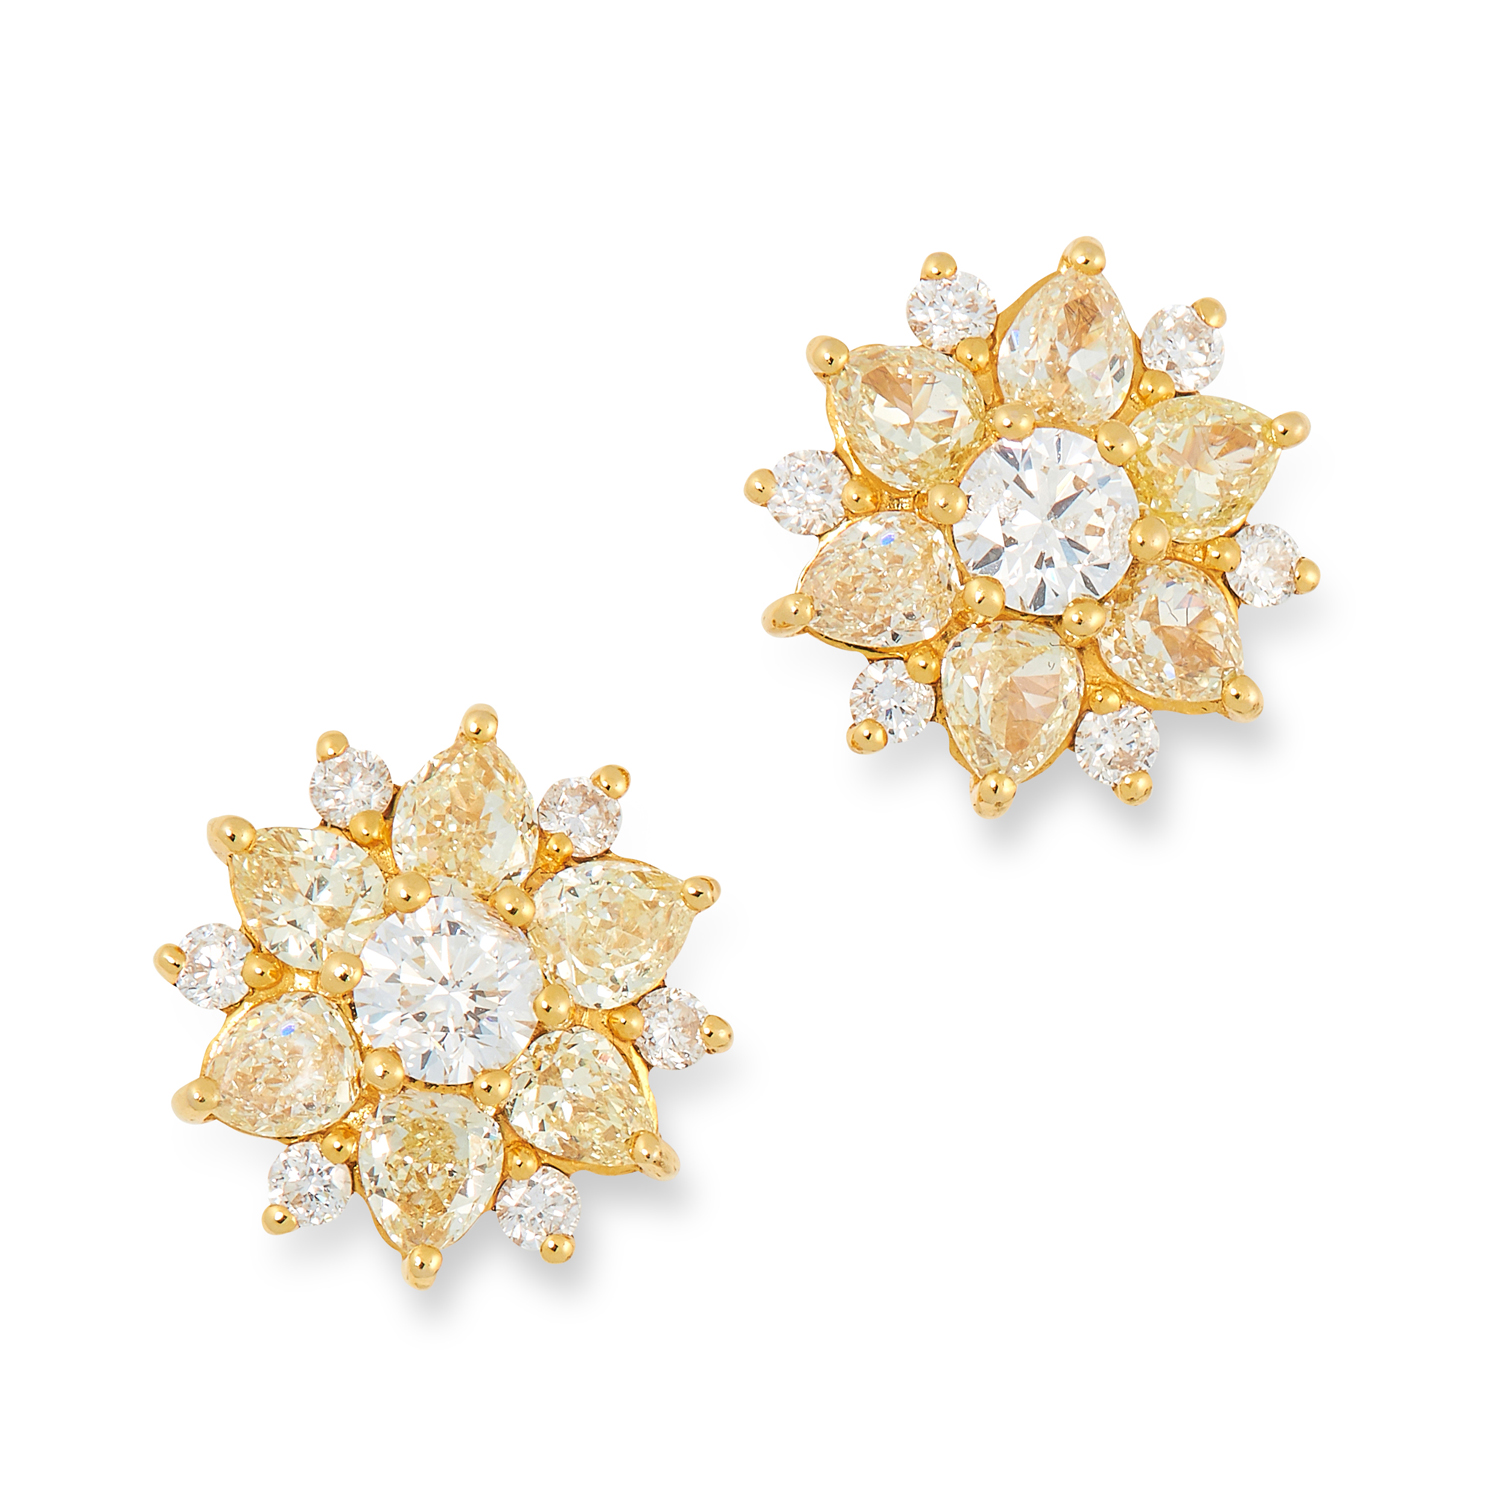 A PAIR OF YELLOW AND WHITE DIAMOND CLUSTER EARRINGS set with pear modern brilliant cut diamonds